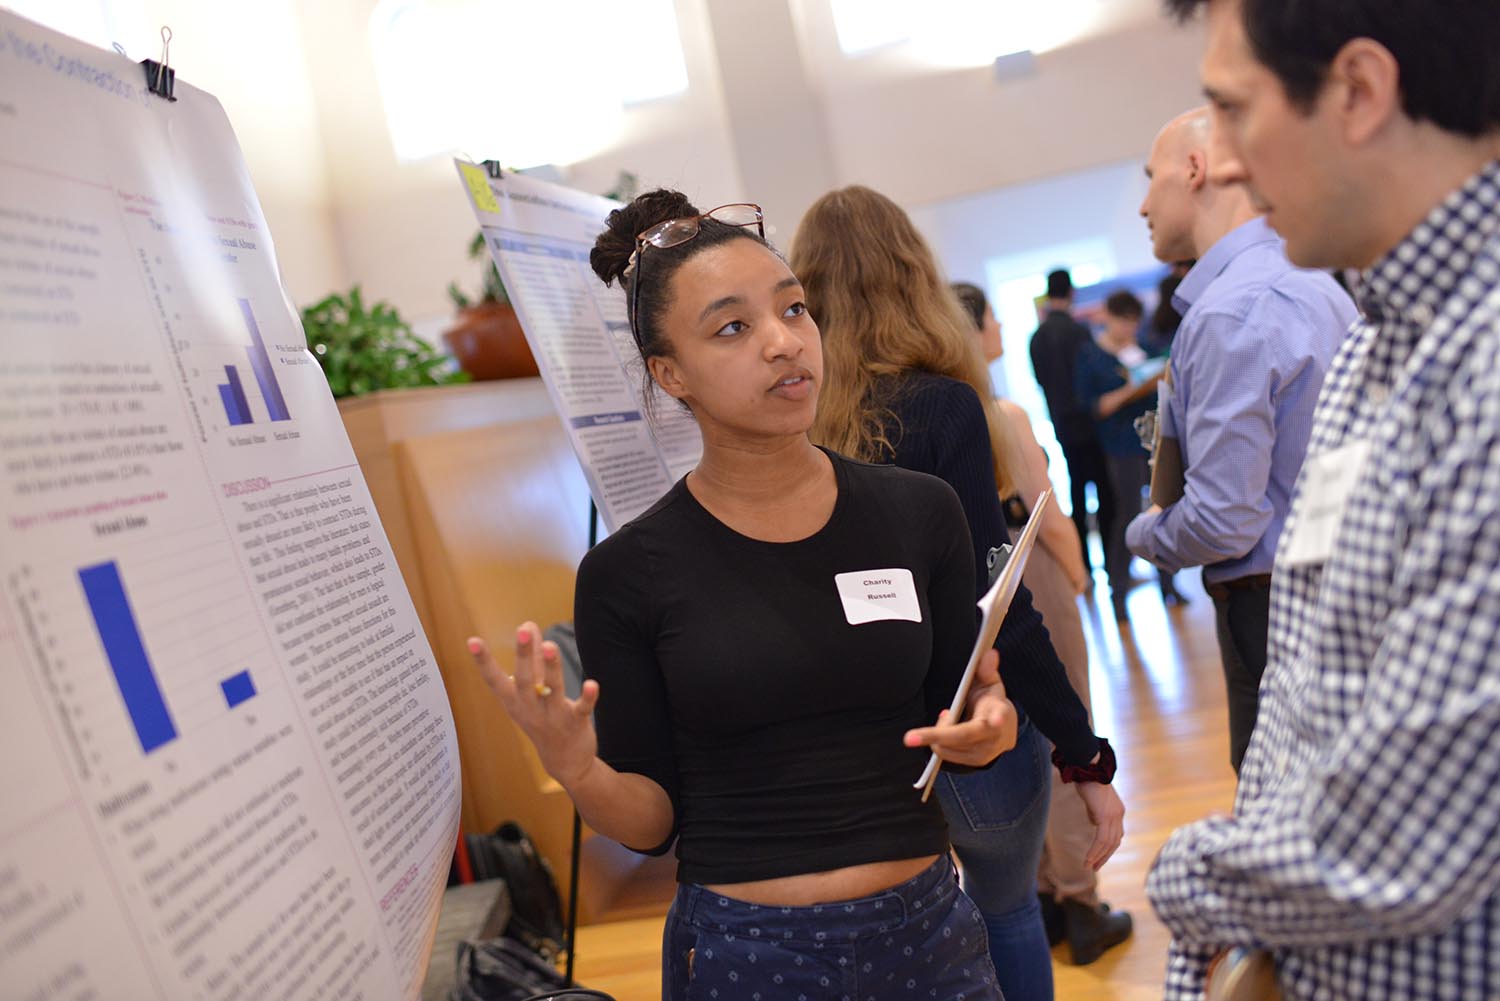 Charity Russell '21 presented her poster titled, "The Association between Sex Abuse and the Contraction of Sexually Transmitted Disease."